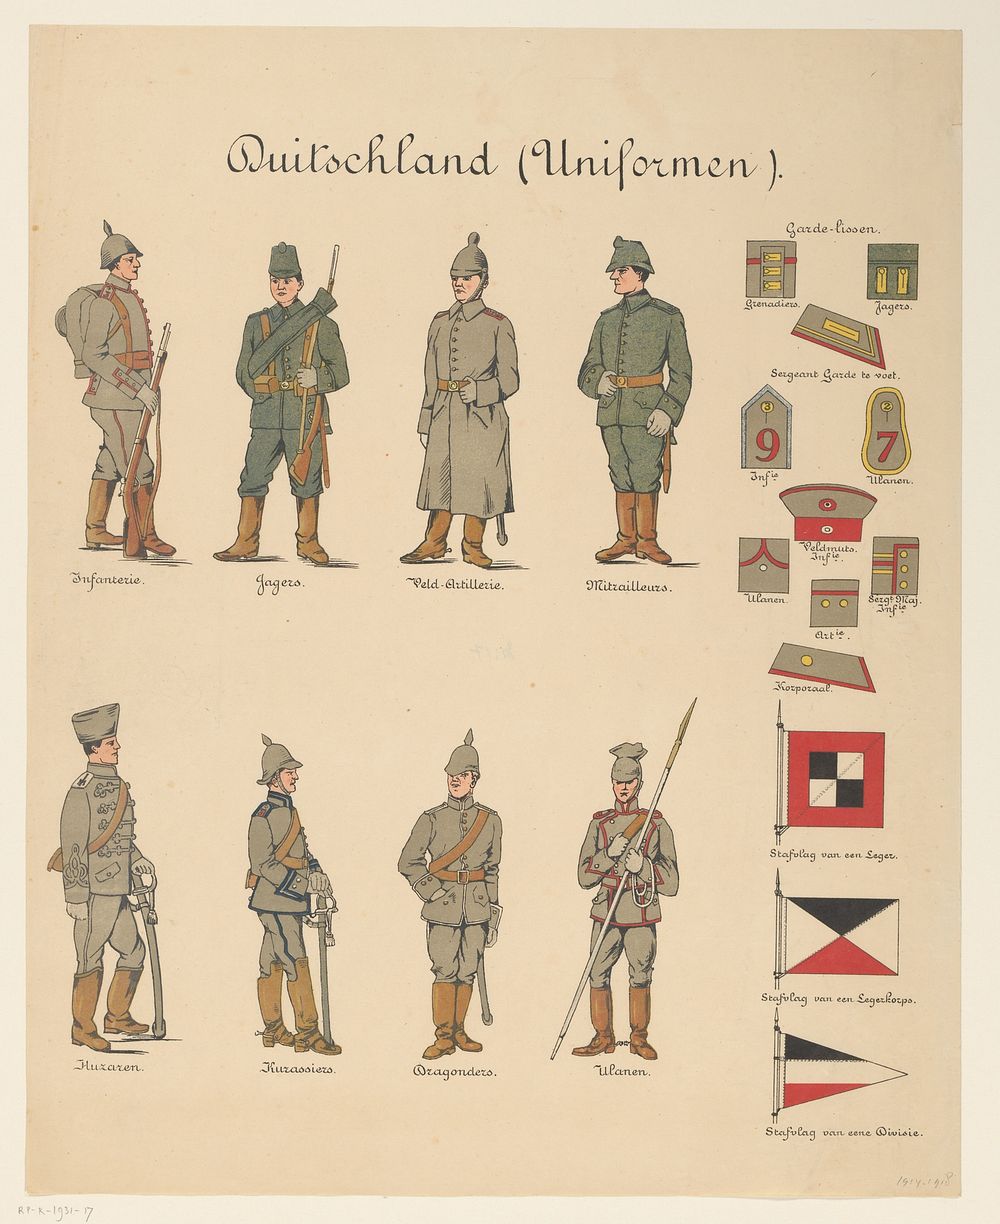 Duitschland (Uniformen) (1914 - 1918) by anonymous